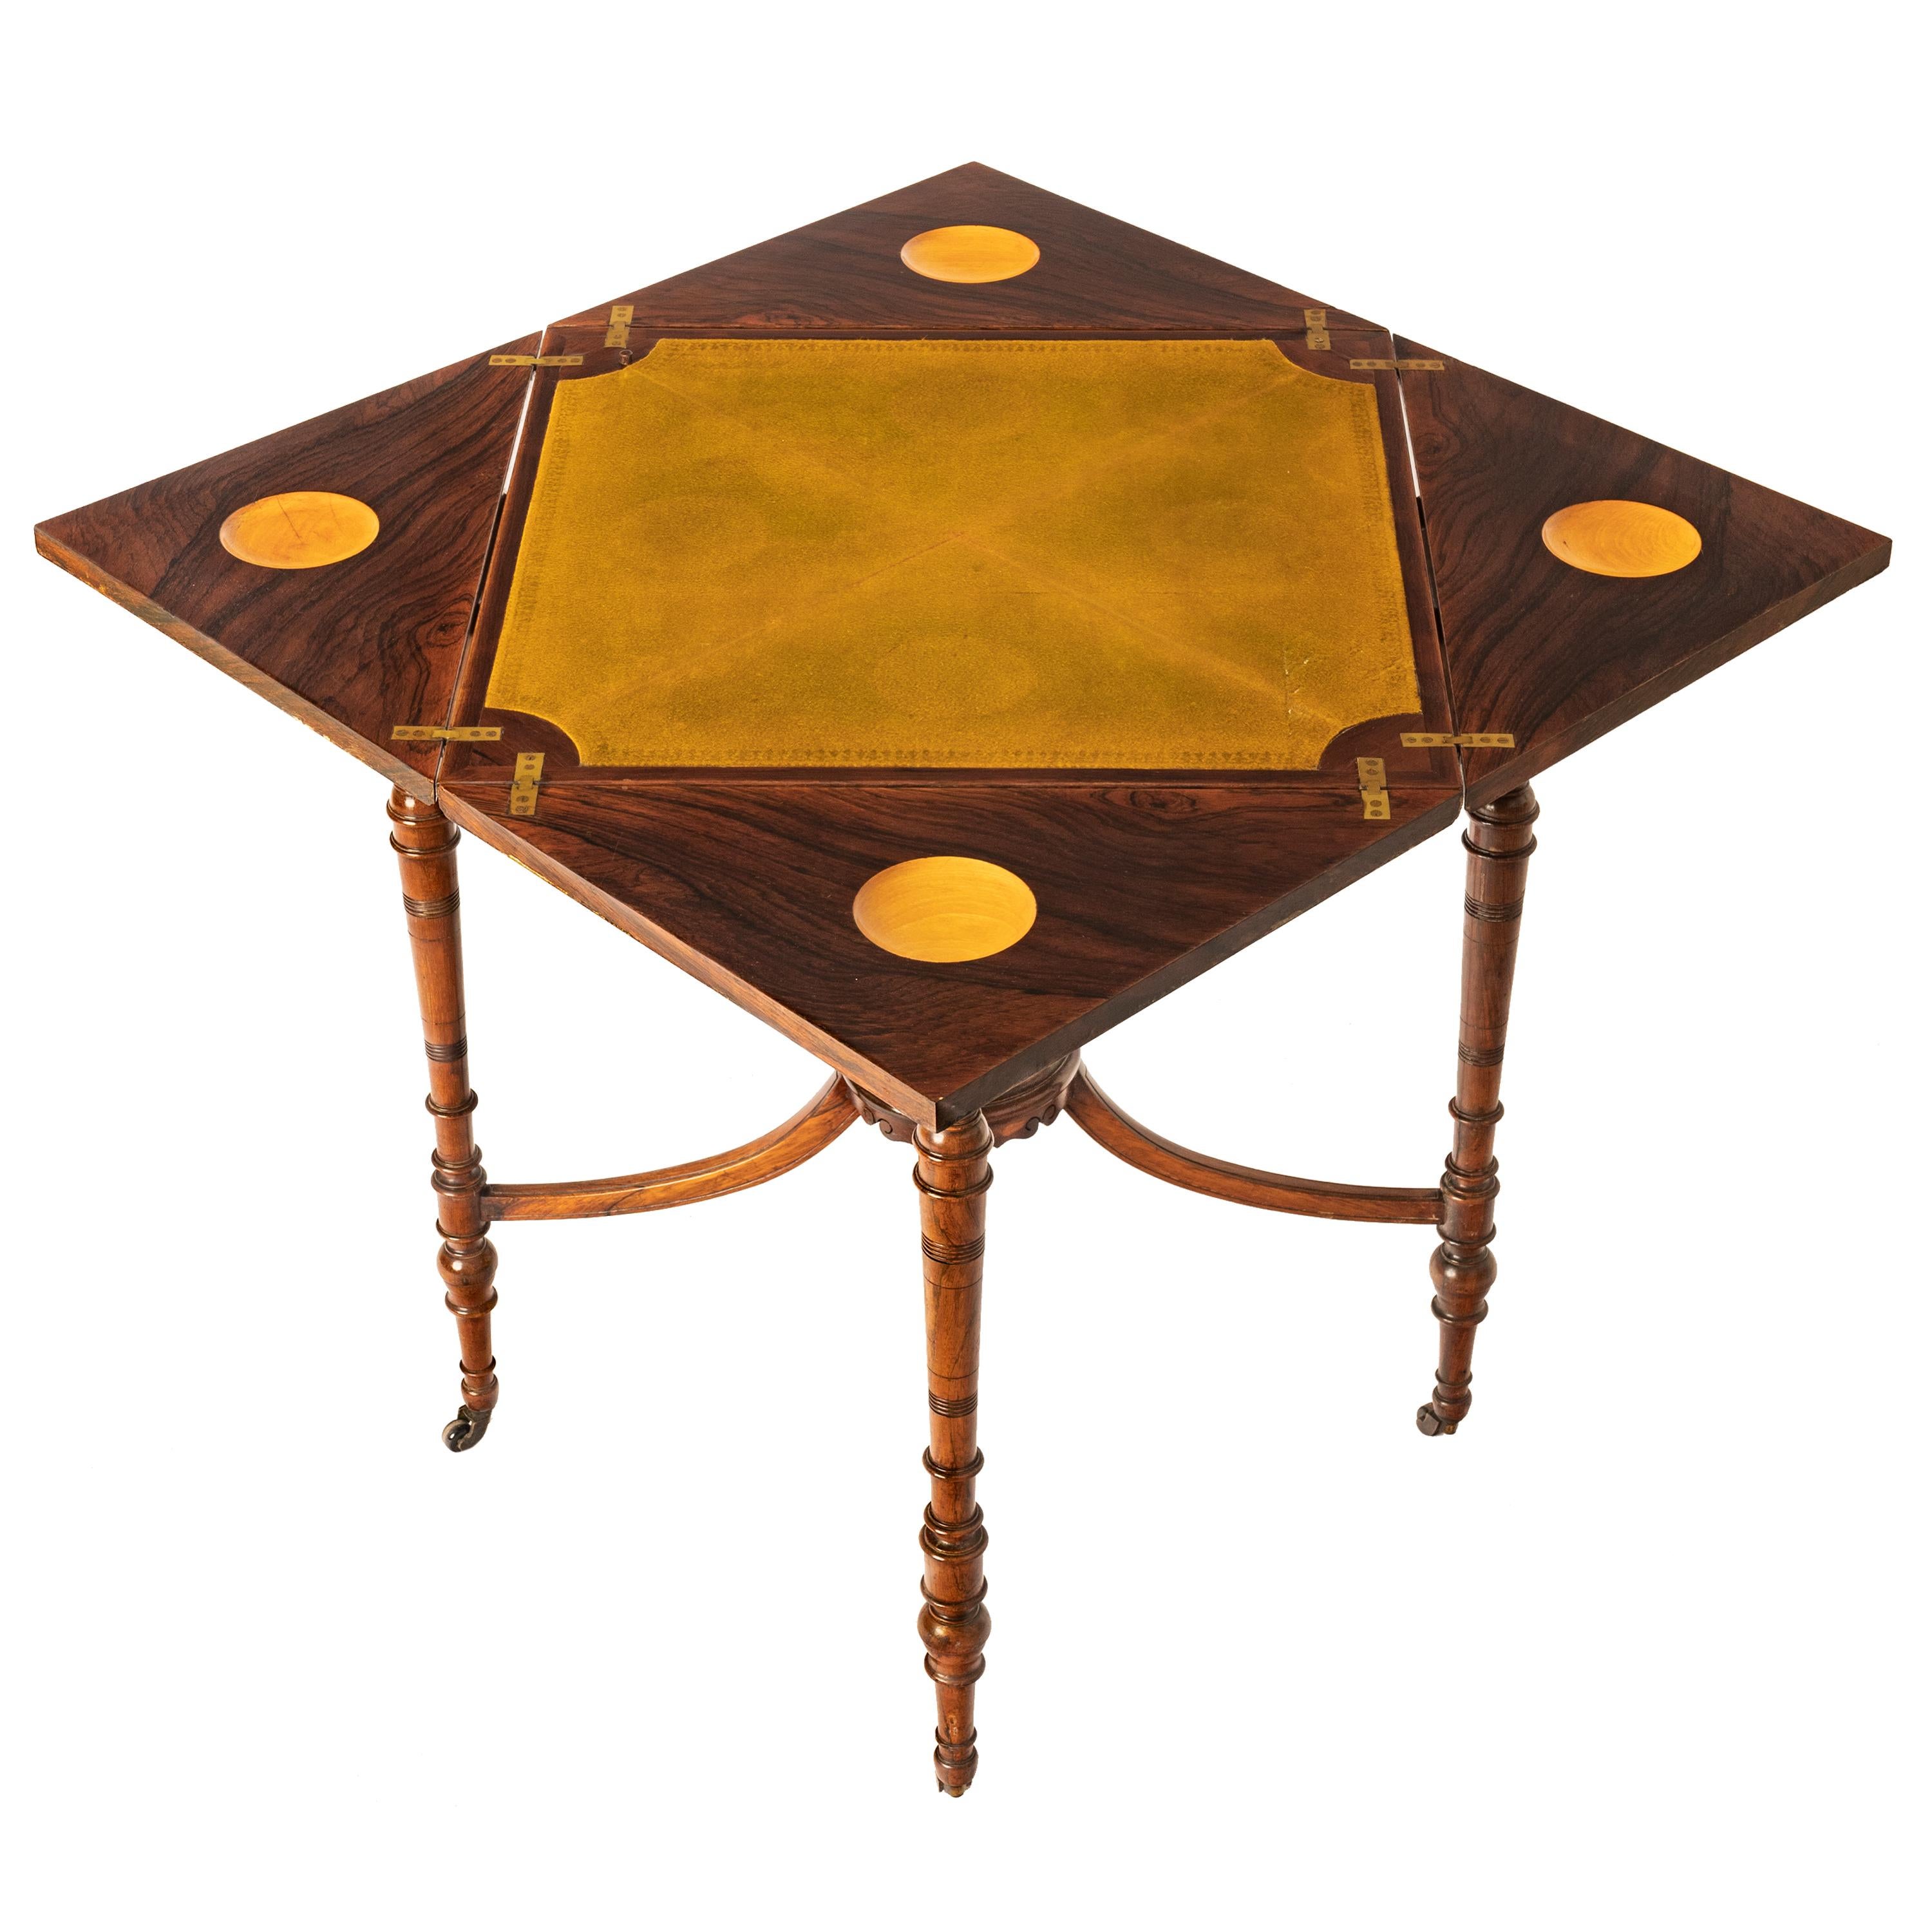 Antique English Edwardian rosewood & marquetry inlaid envelope card table, circa 1890.
The table having a square top with four leaves that are inlaid with floral satinwood marquetry, each leaf is hinged & folds out to to reveal a larger square